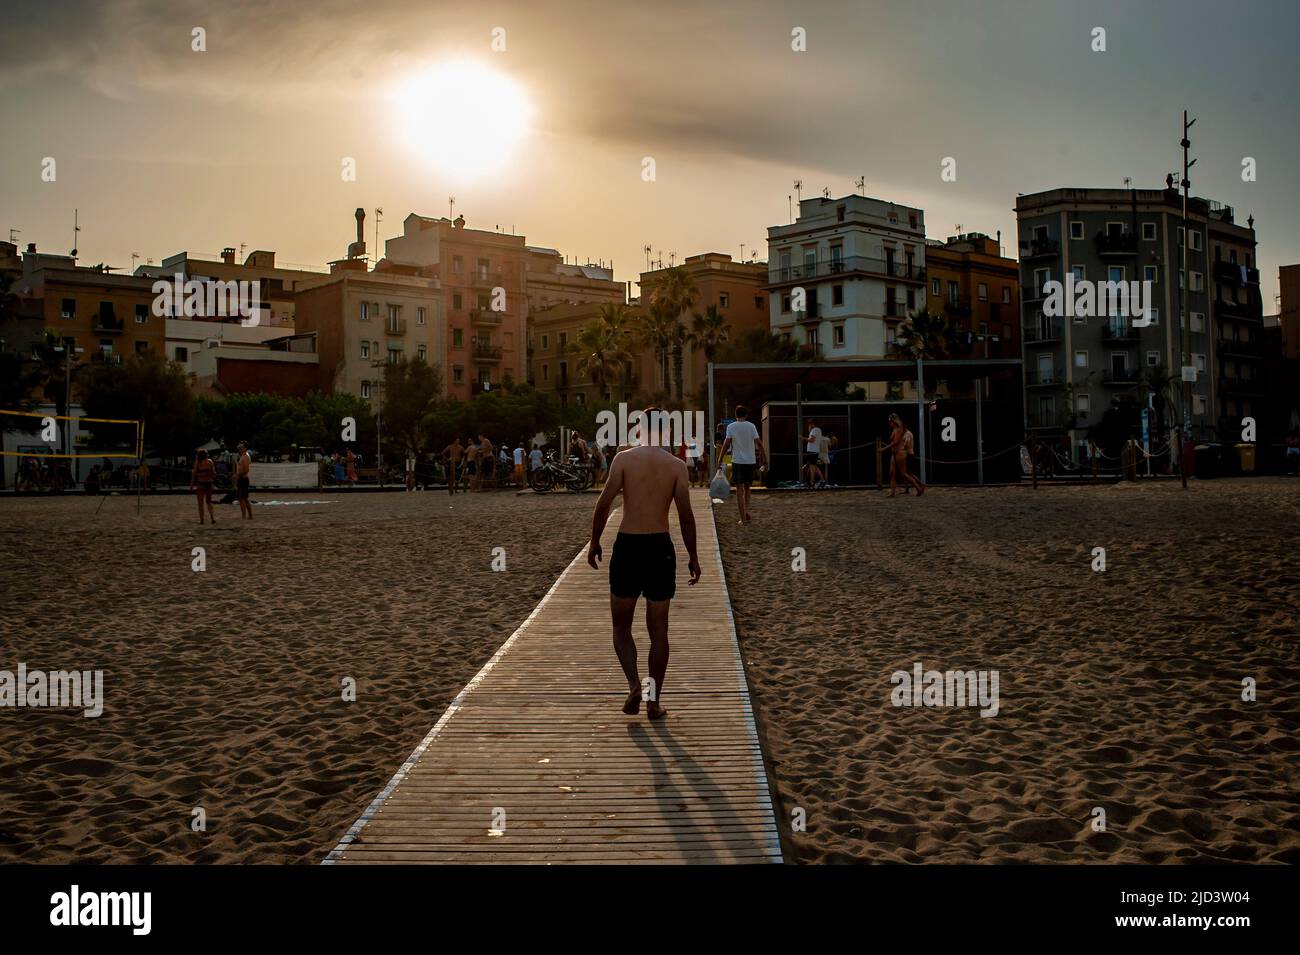 Barcelona, Spain. 17th June, 2022. June 17, 2022, Barcelona, Spain: Man walks a footpath at the Barceloneta beach in Barcelona as a heat wave is underway in parts of Western Europe, with widespread temperatures near or above 104 degrees Fahrenheit (40 Celsius) expected through the weekend. Current heatwave brings abnormally high temperatures for June days in Spain. Credit:  Jordi Boixareu/Alamy Live News Credit:  Jordi Boixareu/Alamy Live News Stock Photo